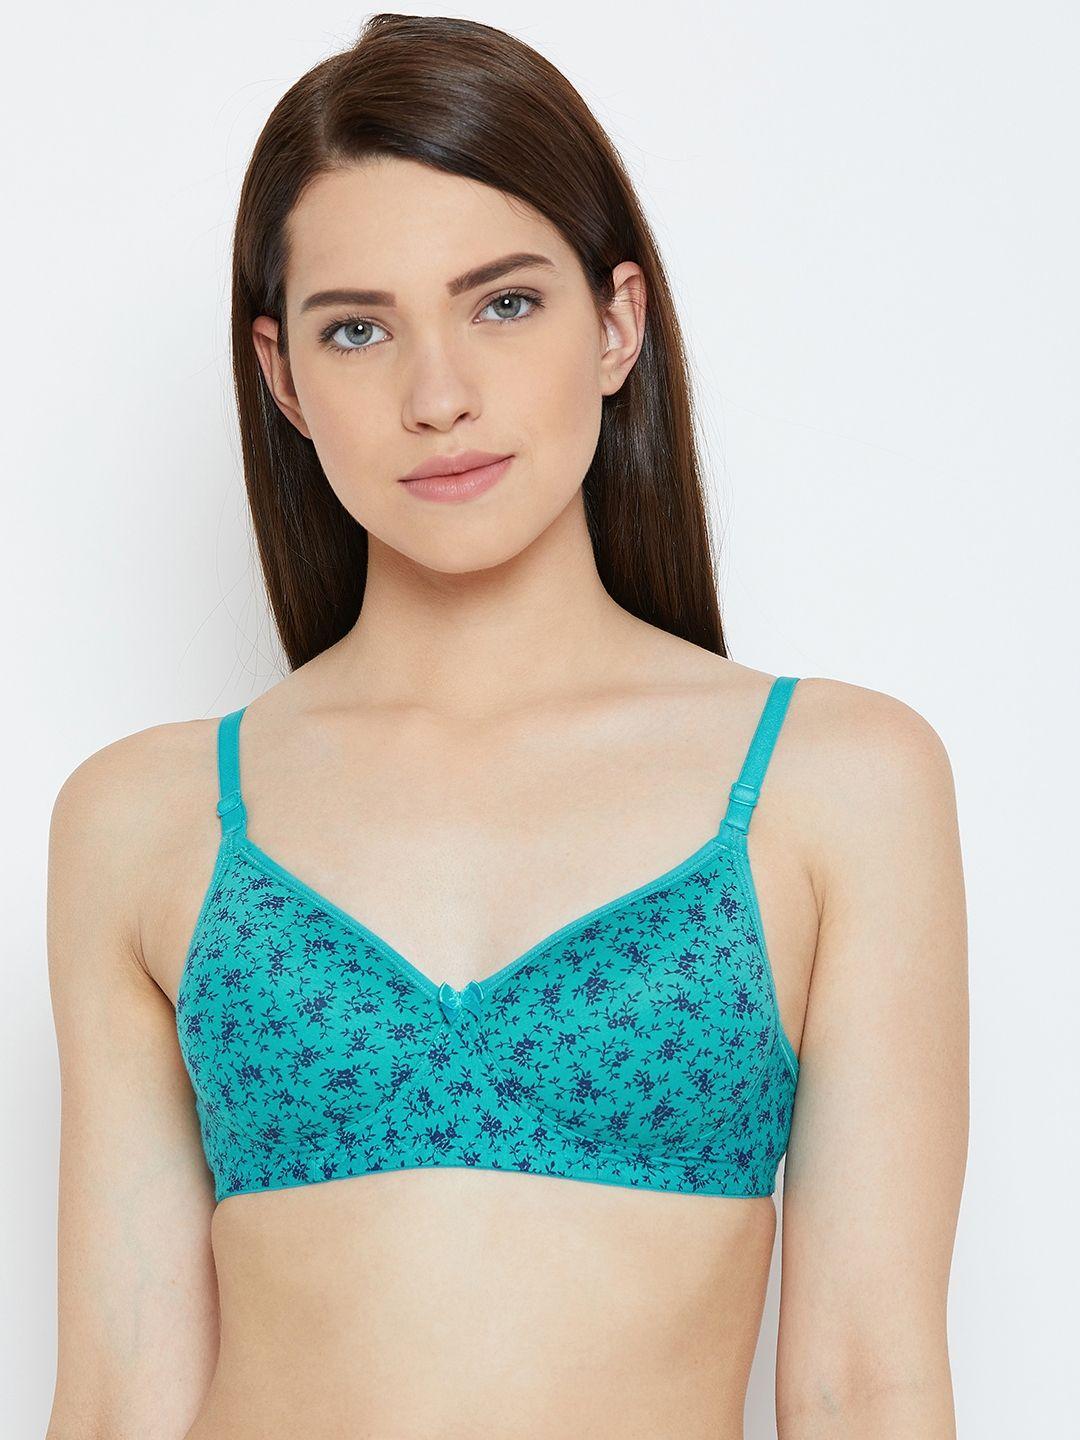 lady-lyka-blue-printed-non-wired-lightly-padded-t-shirt-bra-happy-moods